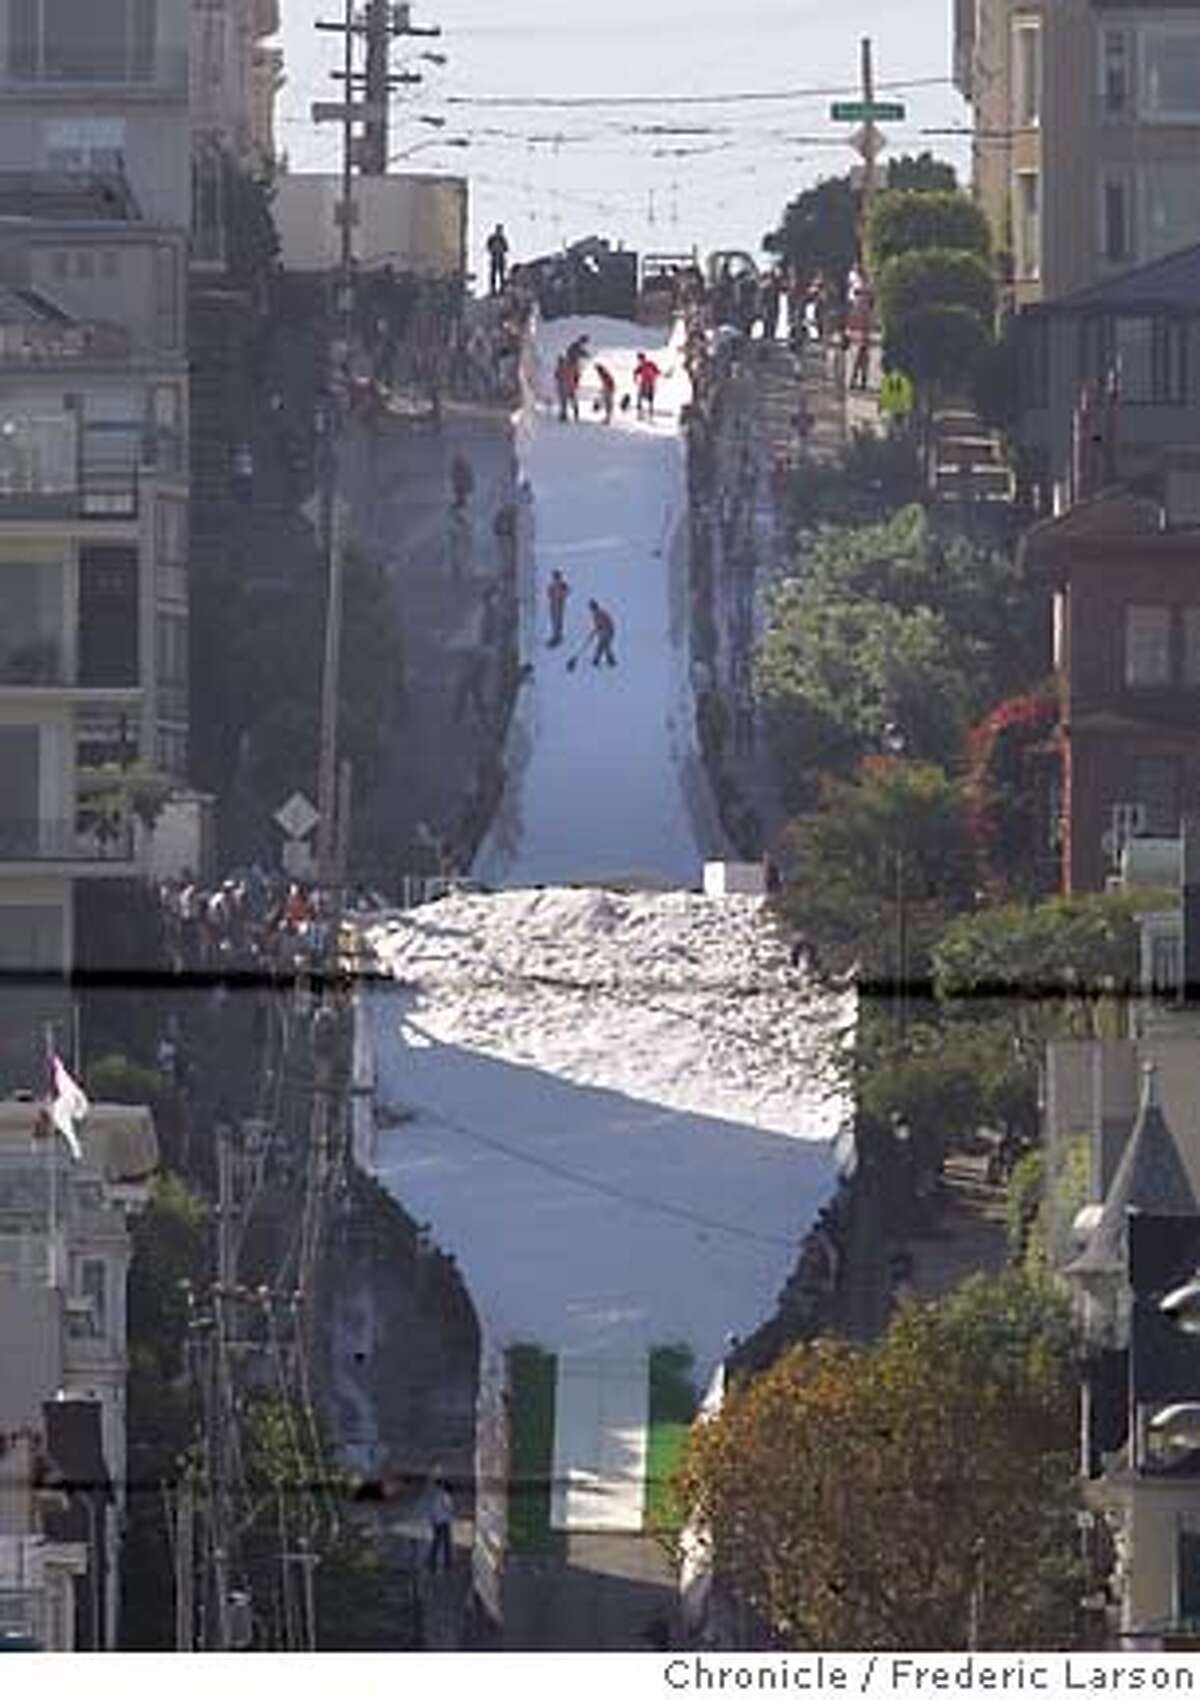 SKIJUMP13_0594_fl.jpg 10am -photo's of progress every 15 minutes from the foot of Filmore Street and Marina- Icer Air 2005, a promotional ski-jump contest took over an intersection of San Francisco's Fillmore Street and surrounding blocks in Pacific Heights Wednesday afternoon. And residents who live near the section of the Fillmore Street hill where the jumpers will be flying Thursday -- and who objected to the issuing of city permits for the event because of the disruption it would cause and financial risk the city would face -- are angrier than before. Snow blowing begins at 7am; practice at 10am; the Jumps happen from noon to 4pm...ry Photographer:� 9/29/05 San Francisco CA Frederic Larson The San Francisco Chronicle